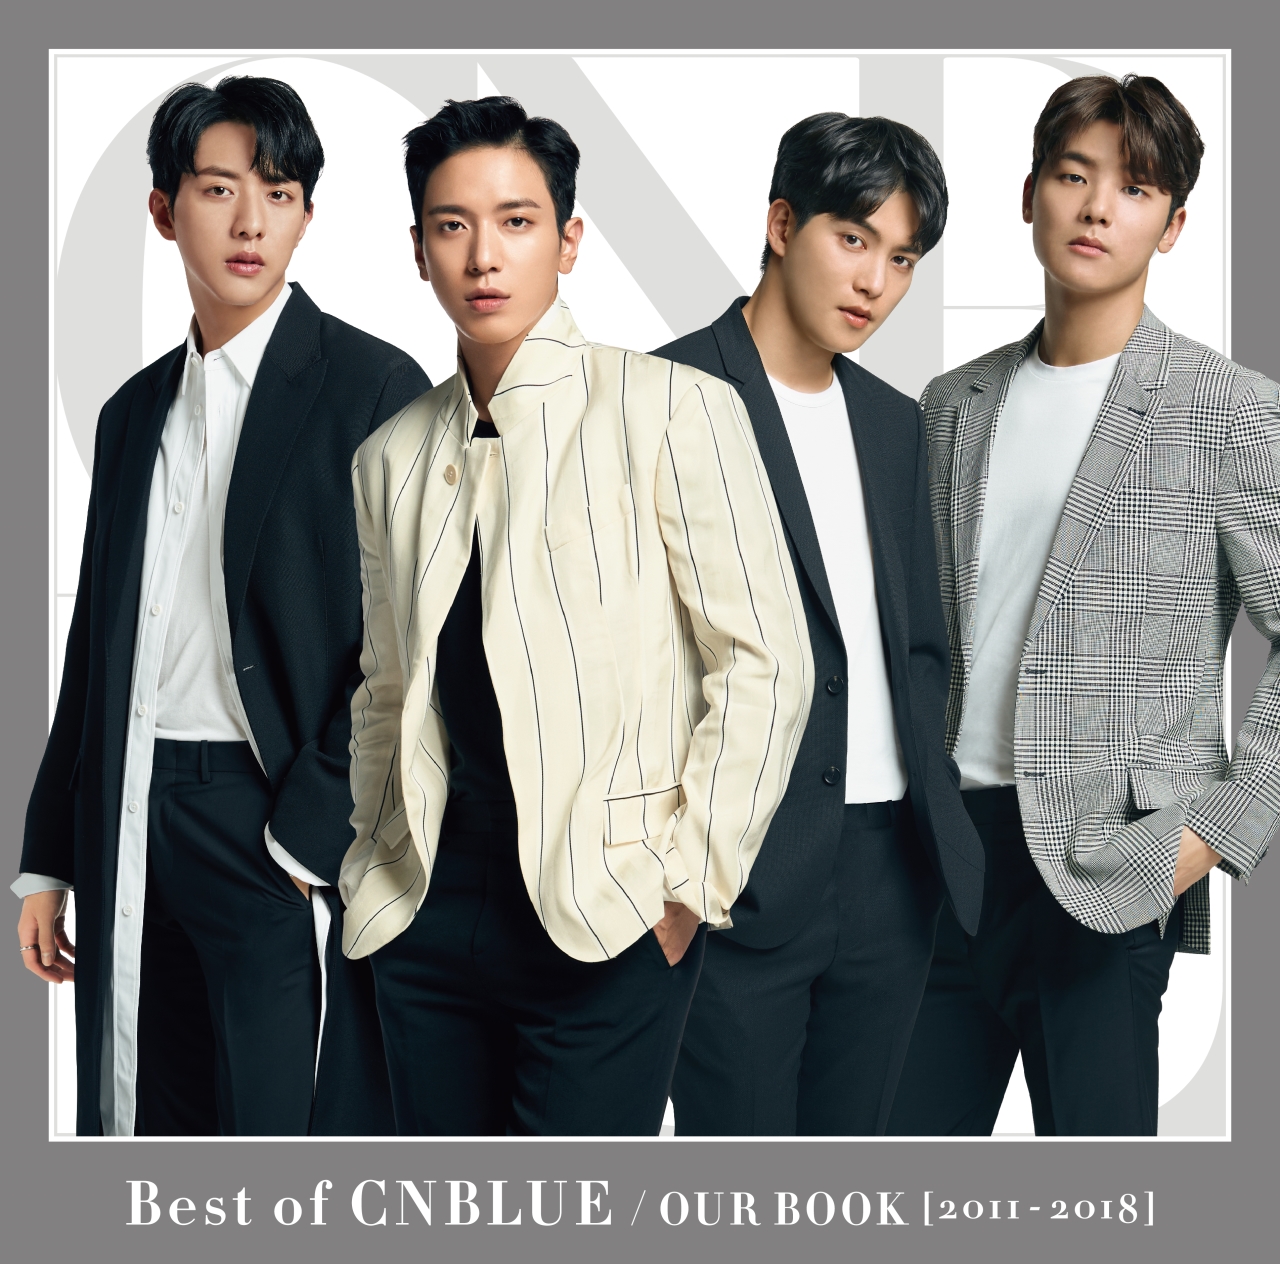 CNBLUE Members Talk About Their Upcoming Comeback With New Album ...